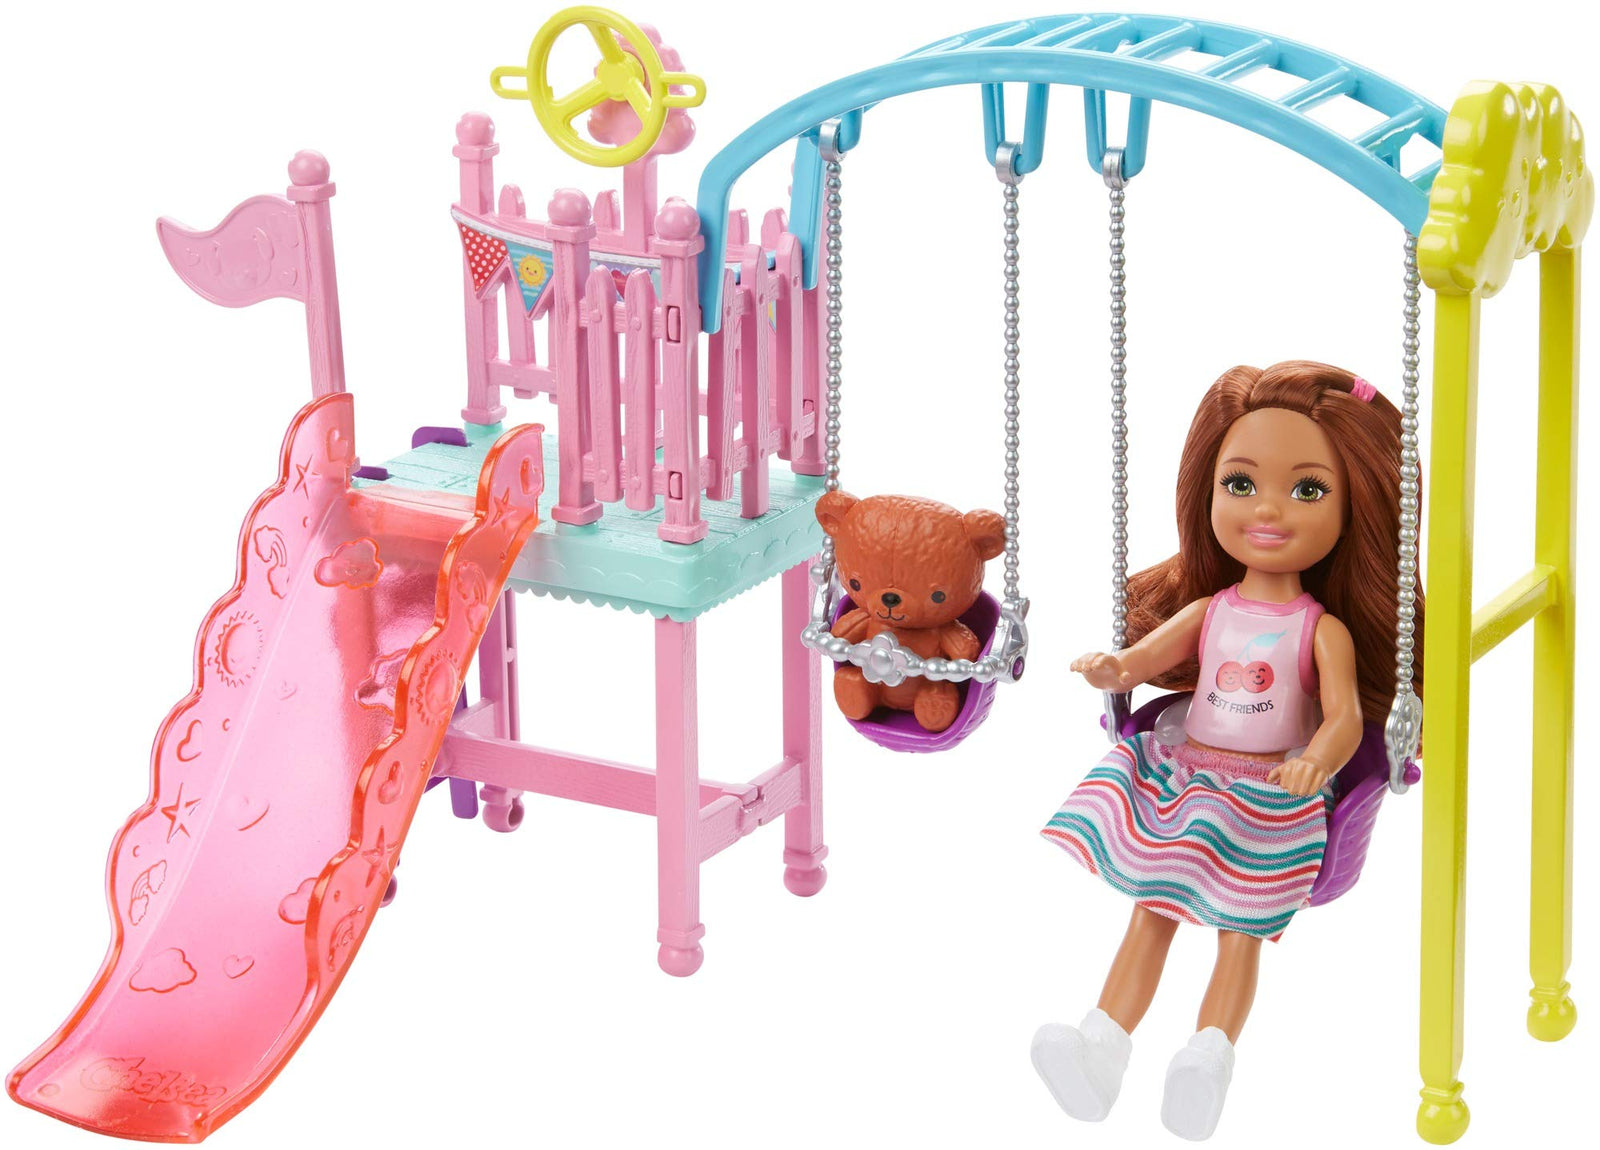 Barbie Club Chelsea Doll and Swing Set Playset with Teddy Bear Figure